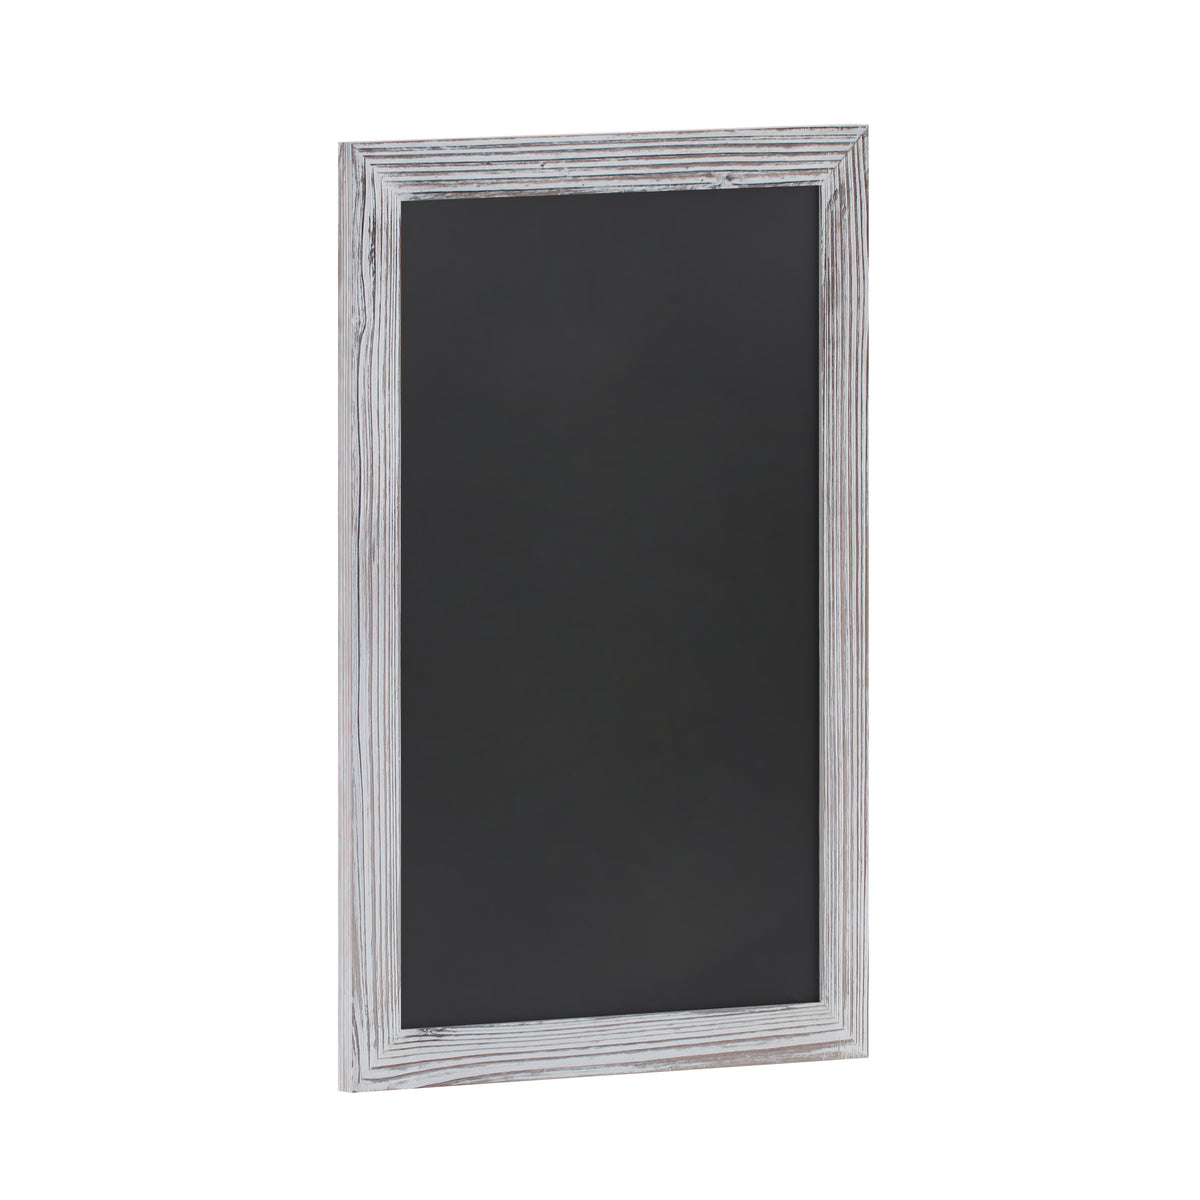 White Washed,20inchW x 0.75inchD x 30inchH |#| 20inch x 30inch Wall Mounted Magnetic Chalkboard with Wooden Frame - Whitewashed